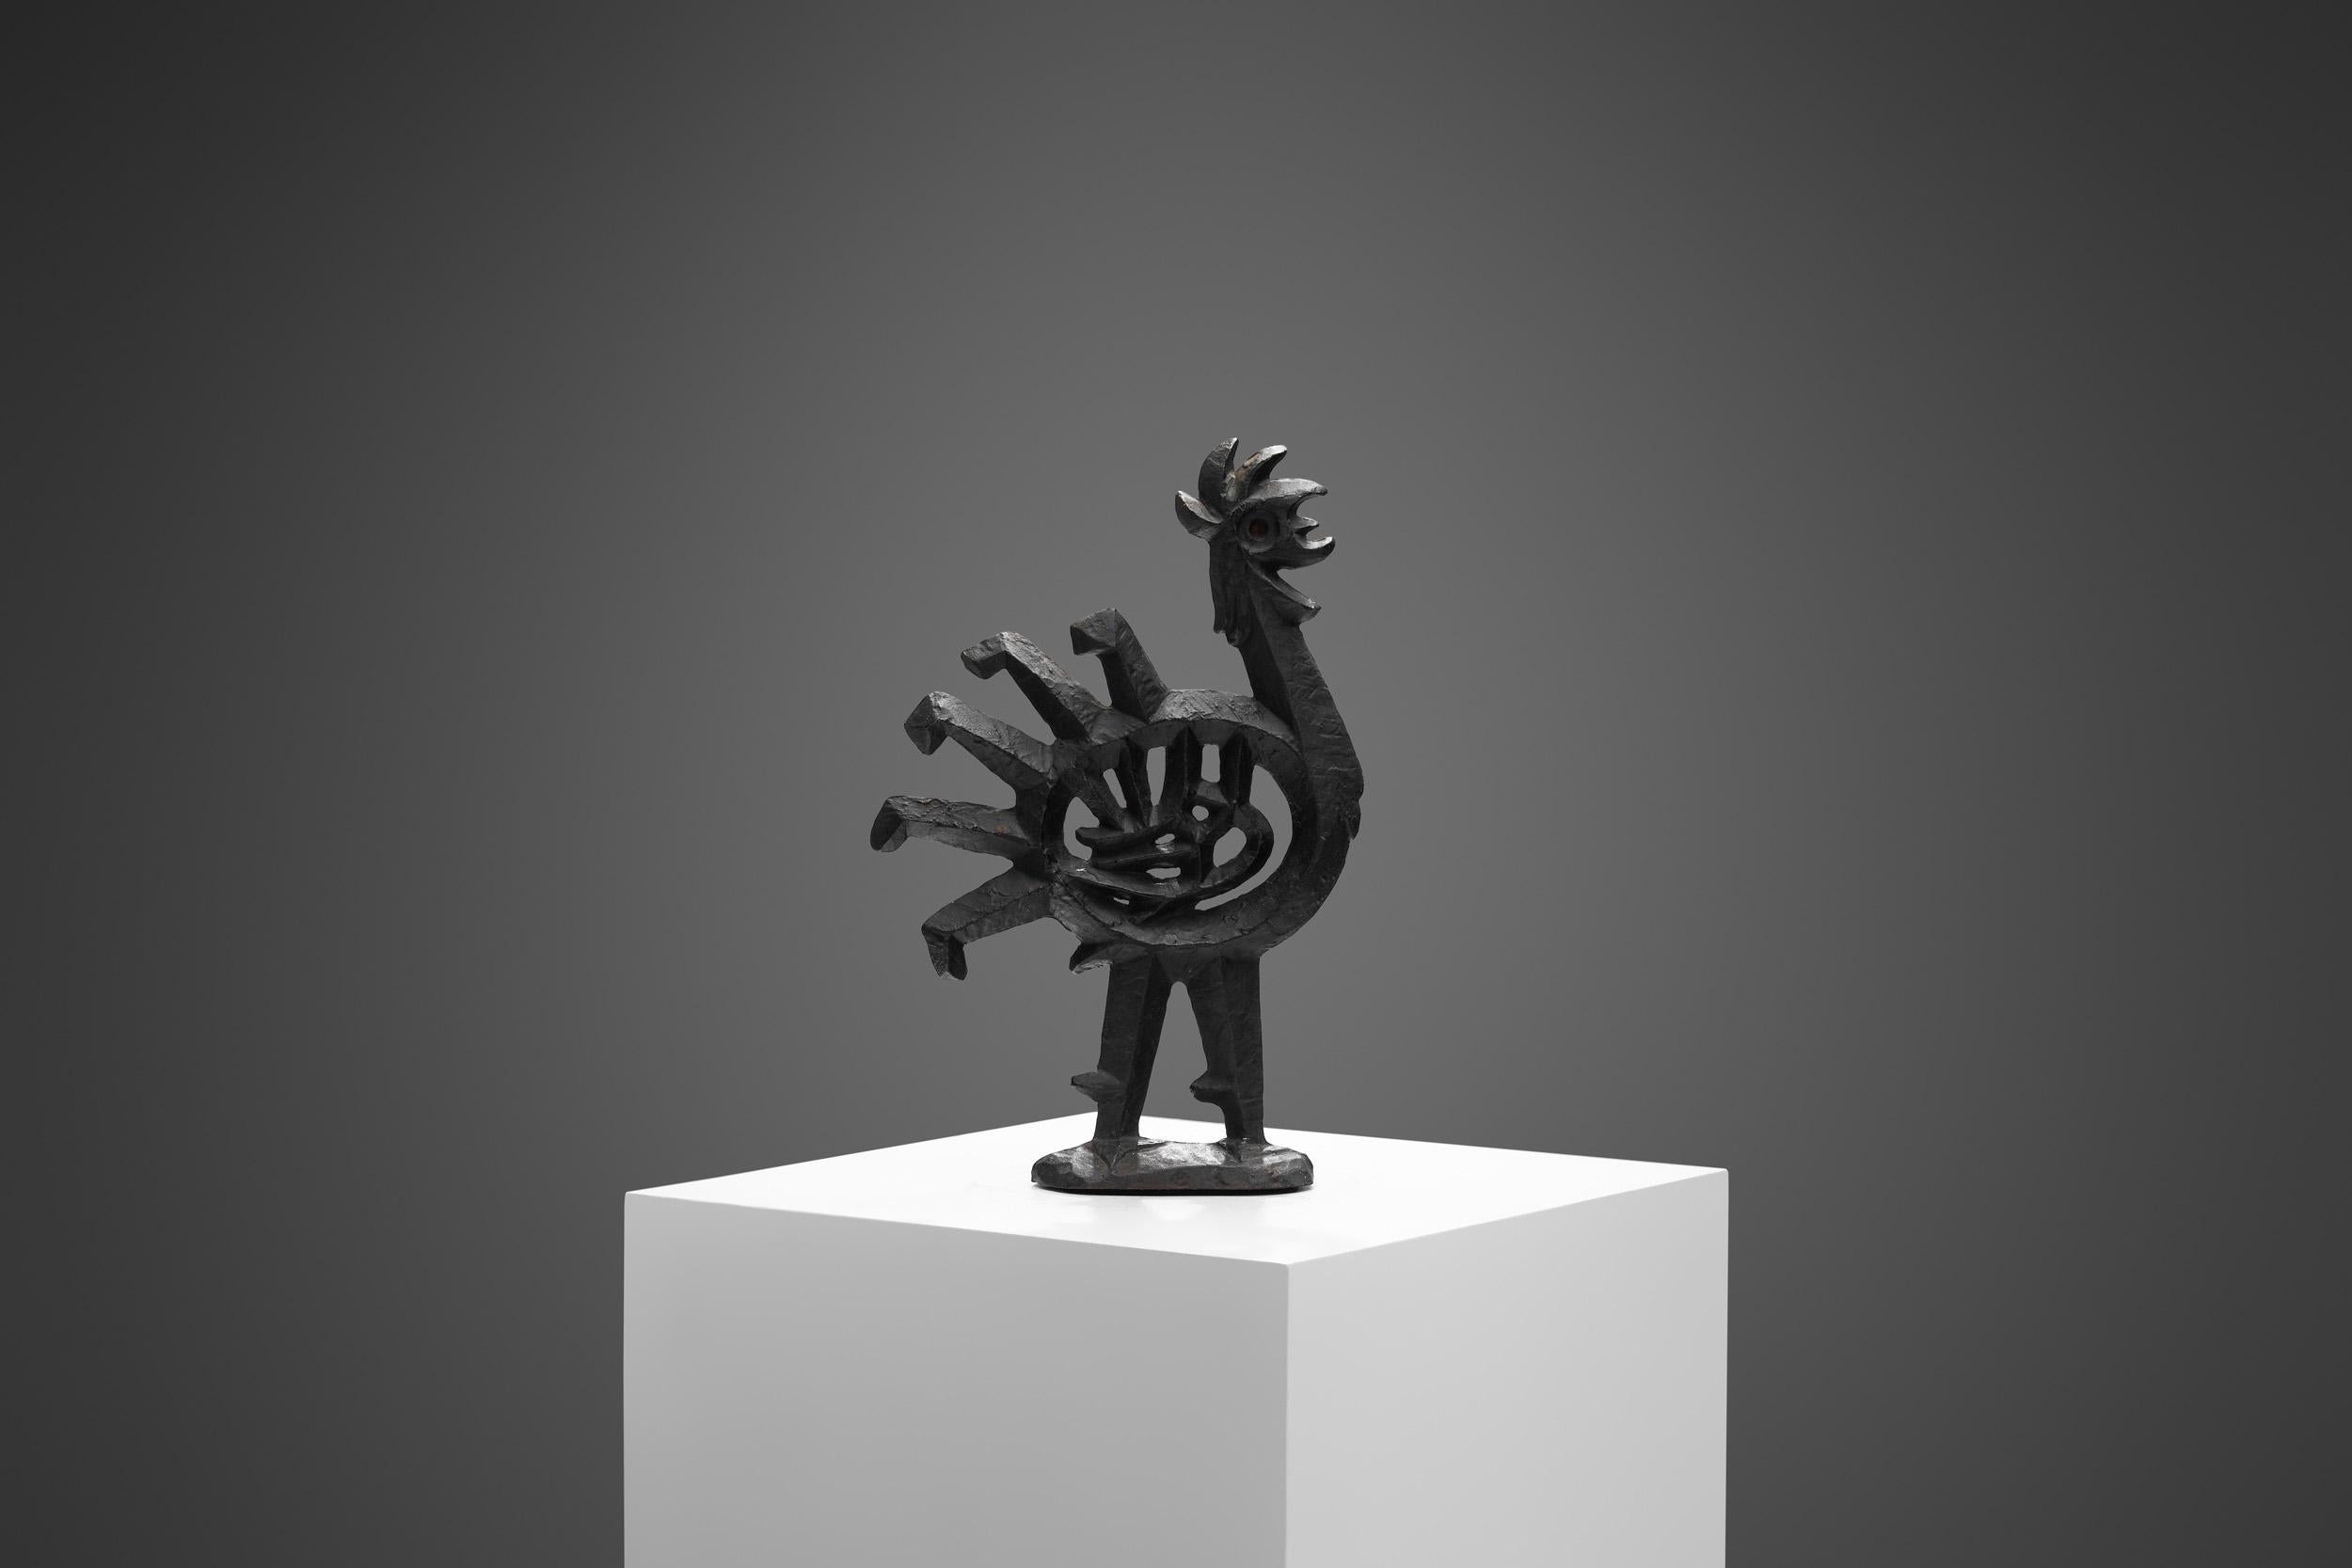 Swedish sculptor, Olle Hermansson is primarily known for his cast iron sculptures and fire screens in the Brutalist style. The characters and creatures appearing in his works are often inspired by Nordic mythology. This characteristic rooster is no